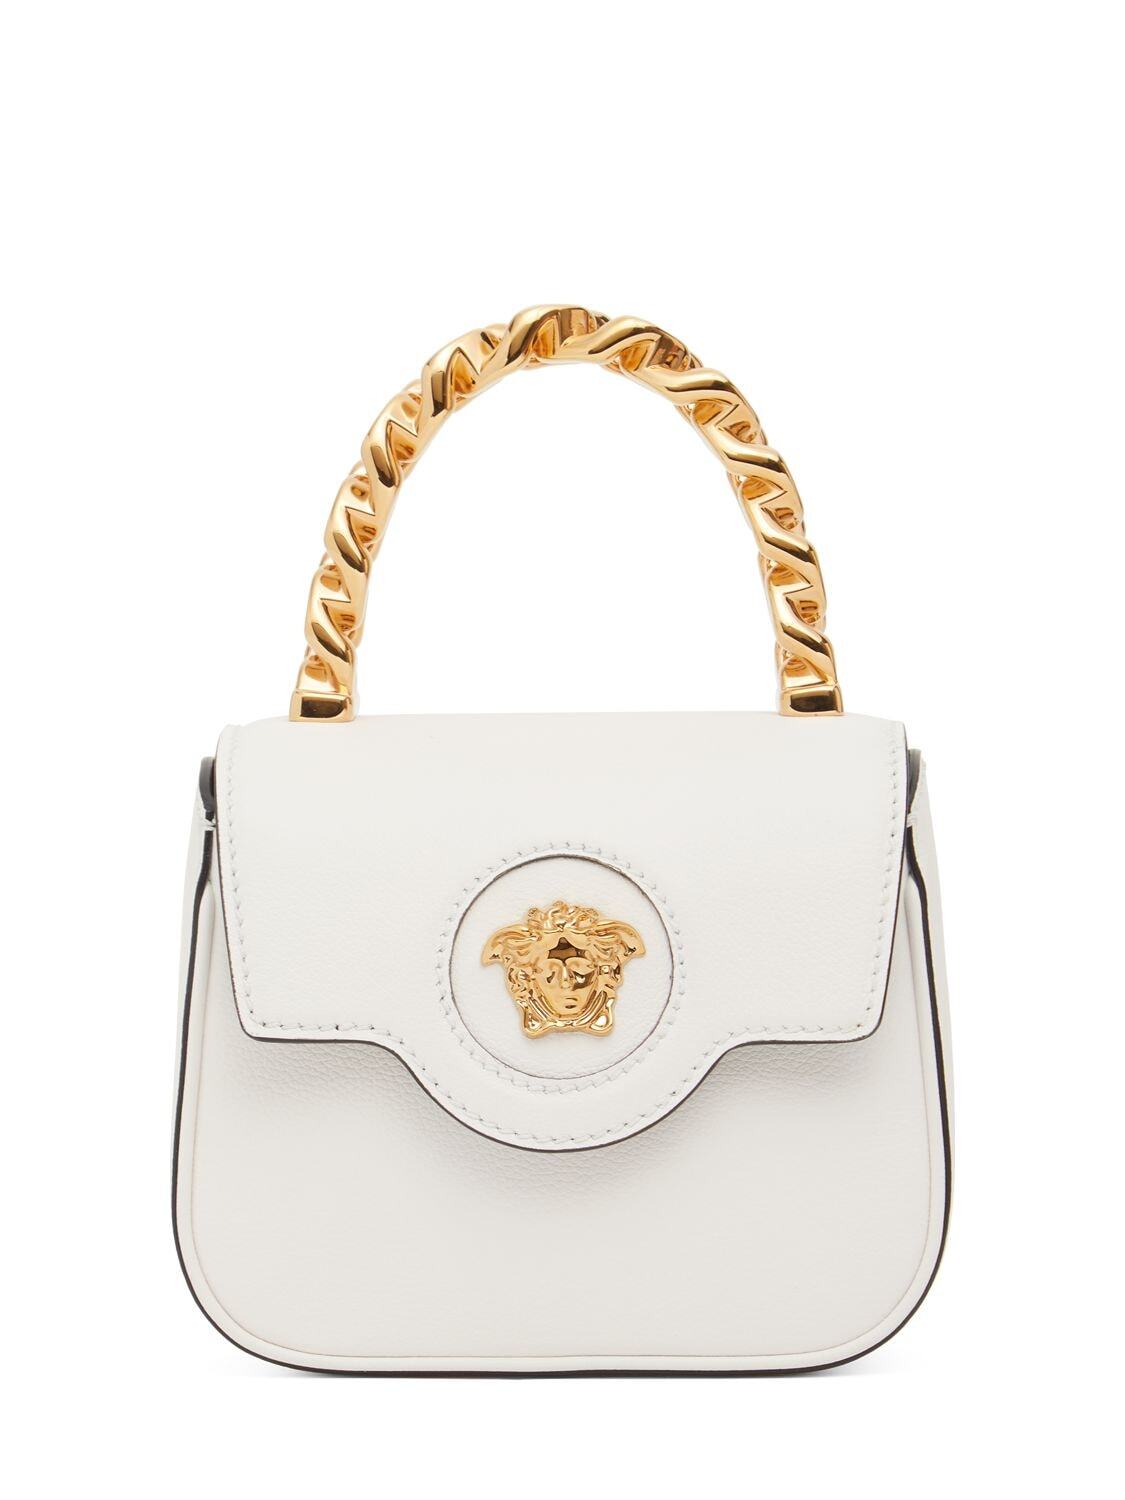 VERSACE Mini Medusa Leather Top Handle Bag in white